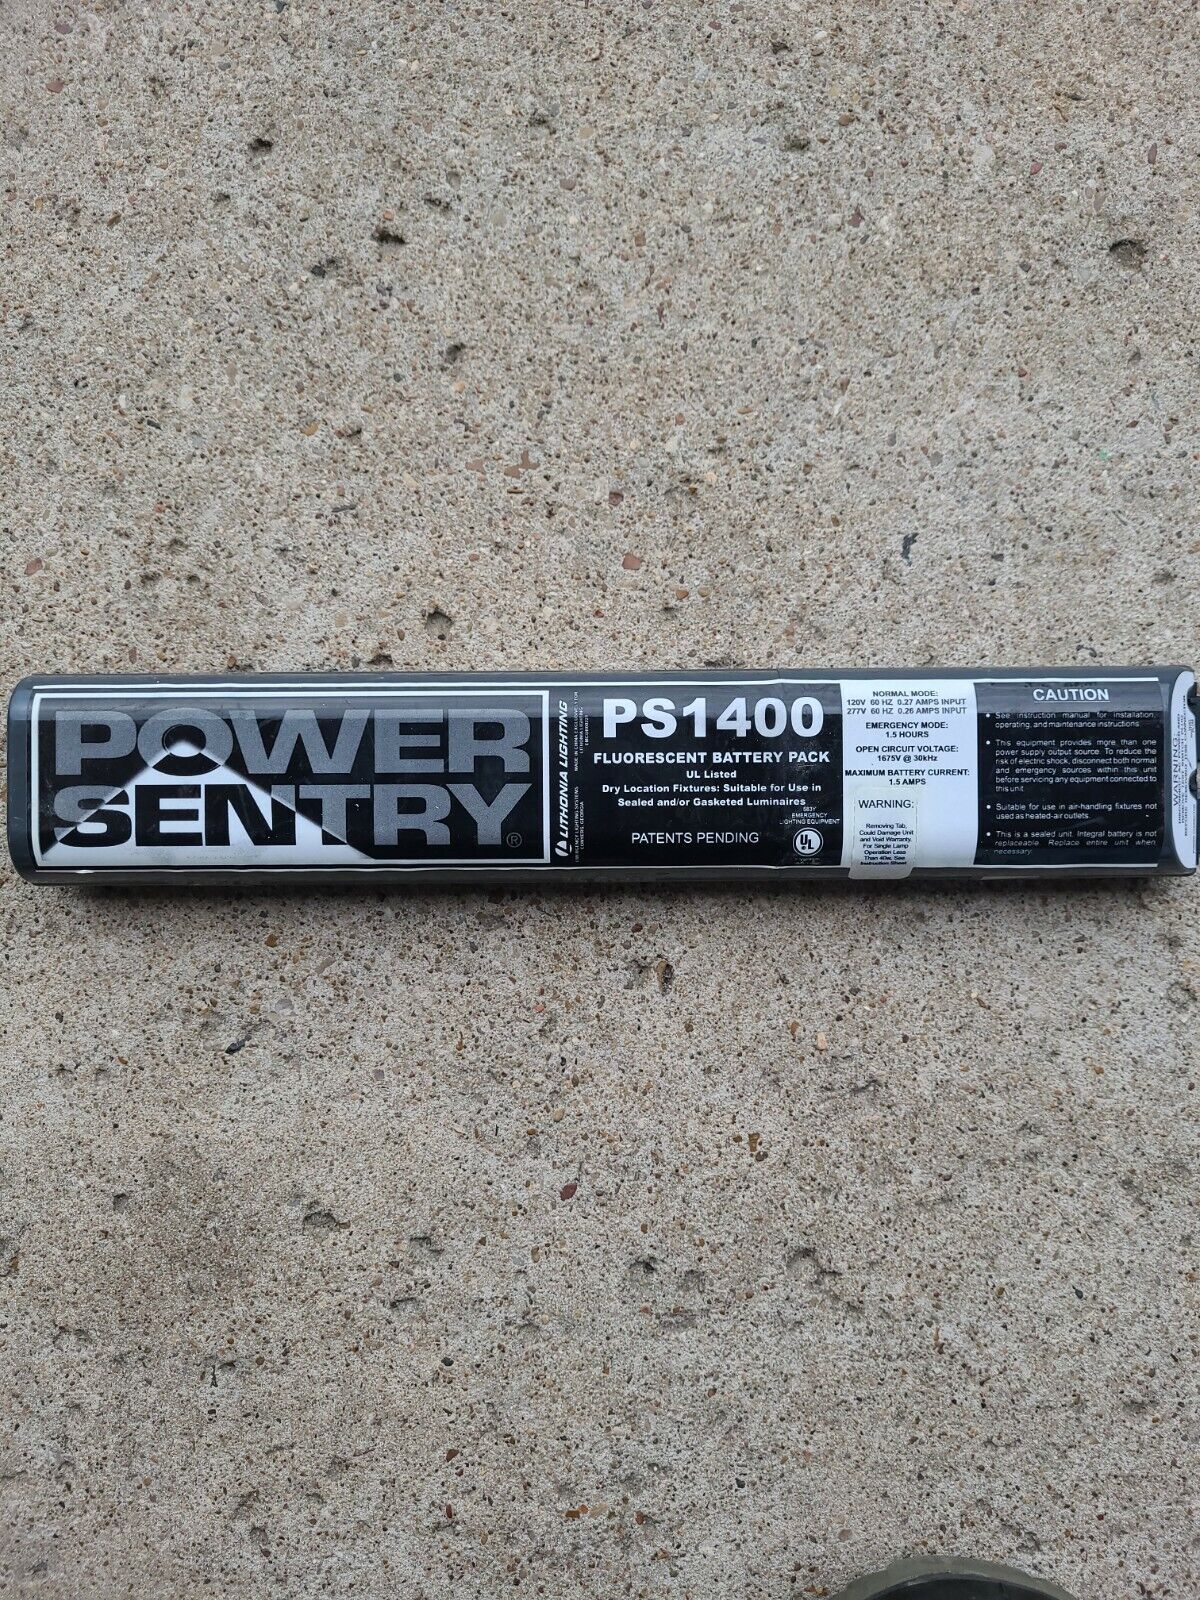 Lithonia POWER SENTRY EMERGENCY BACKUP BATTERY PACK PS1400QD Ballast Used